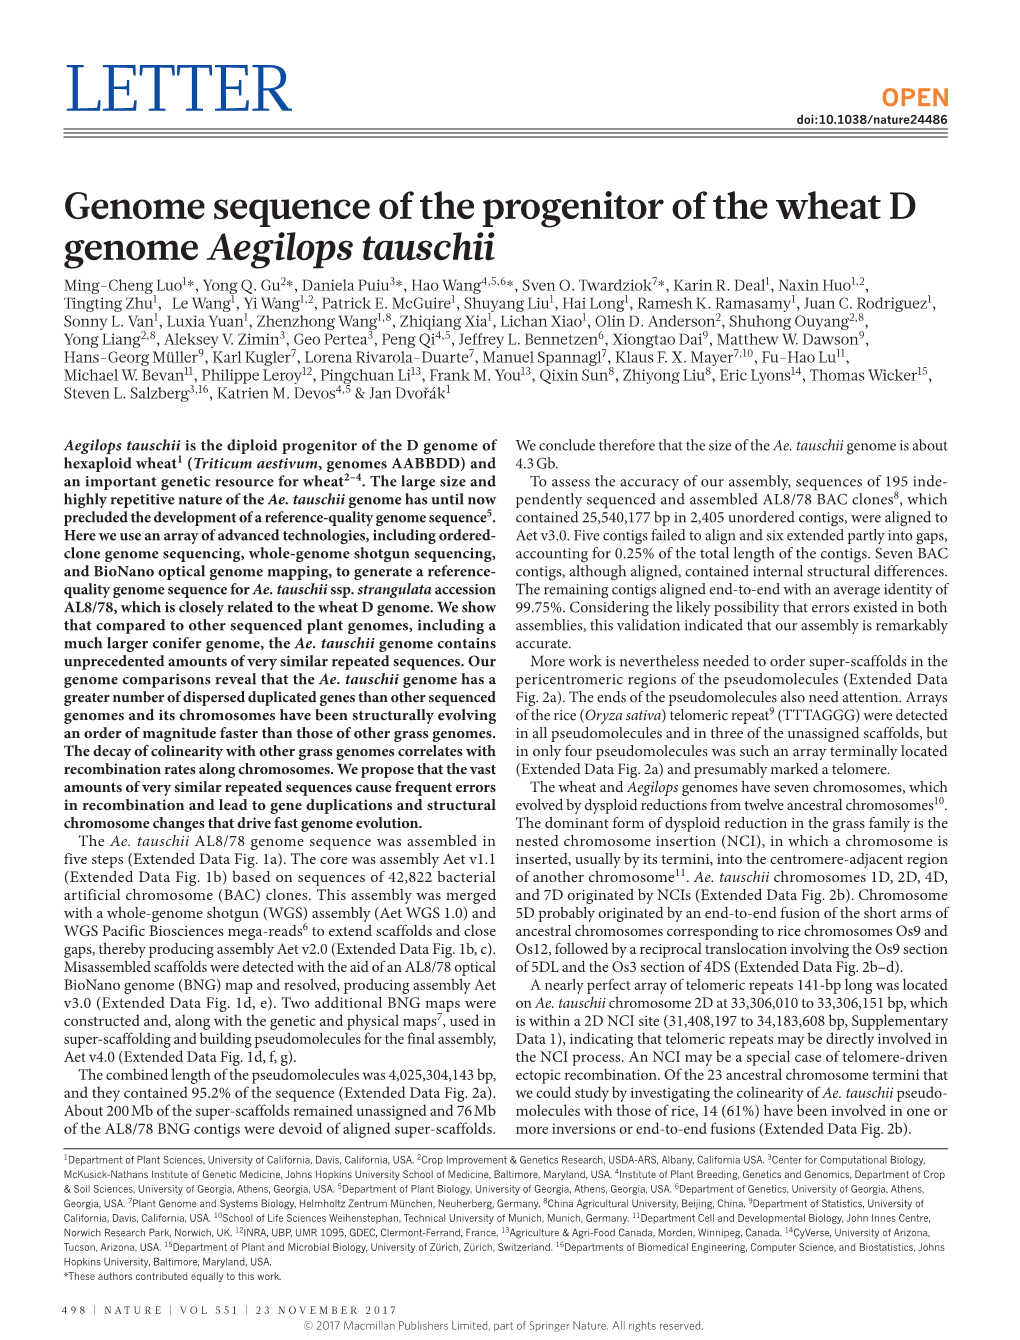 Genome Sequence of the Progenitor of the Wheat D Genome Aegilops Tauschii Ming-Cheng Luo1*, Yong Q